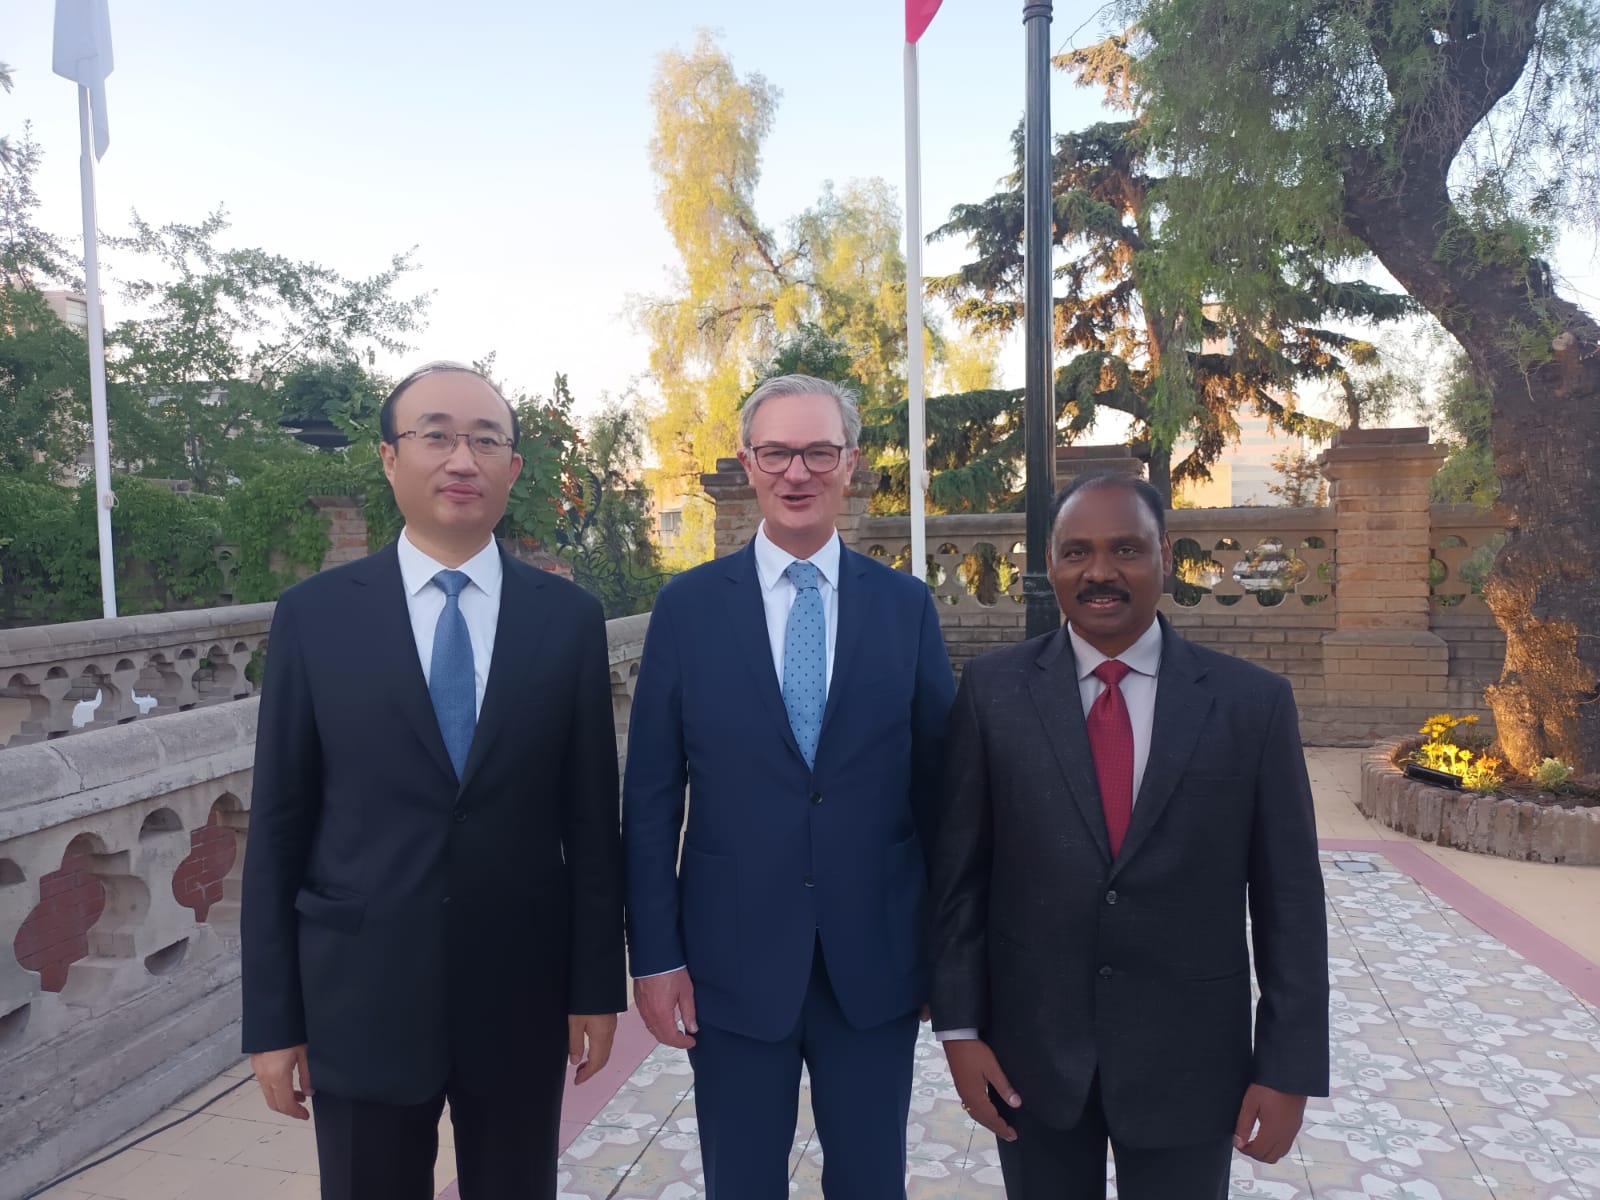 Mr. Girish Chandra Murmu, Comptroller & Auditor General of India with Mr. Kay Scheller, Auditor General of Germany and Mr. HOU Kai, Auditor General of China on the sidelines of U.N. Technical Group and Panel Meeting at Santiago, Chile from 23-29 November 2022